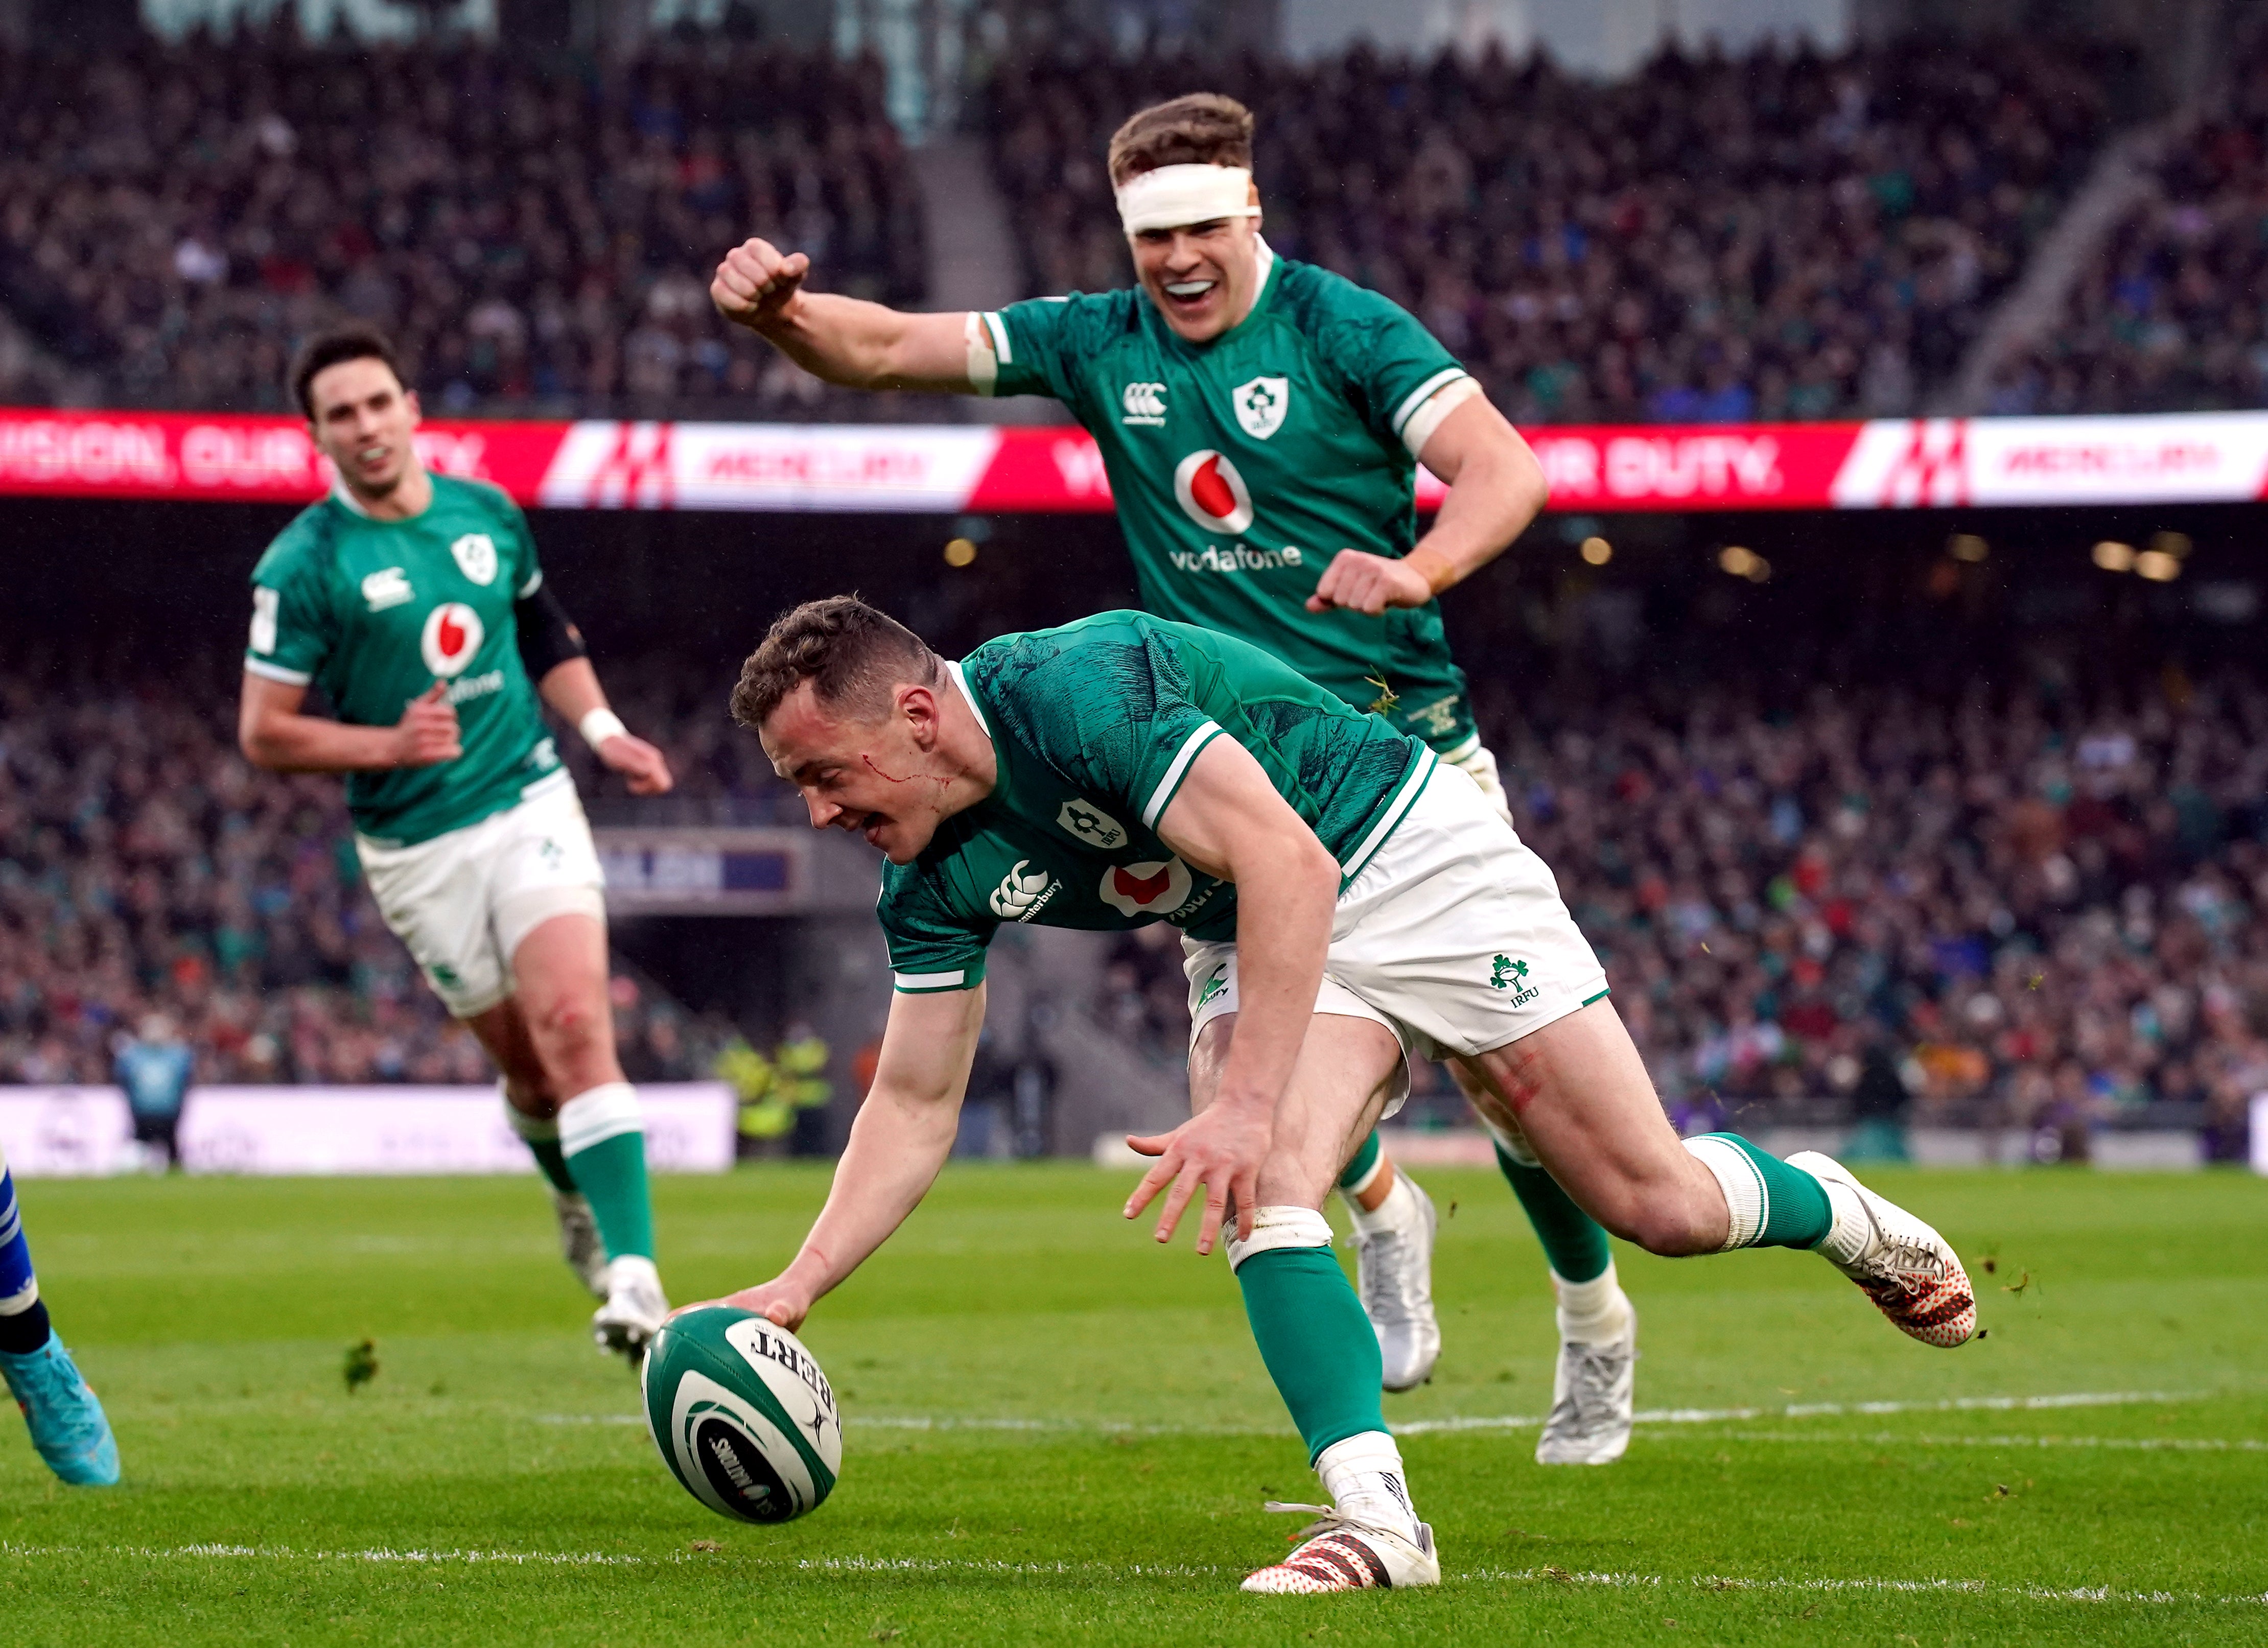 Michael Lowry scored a brace of tries for Ireland against Italy